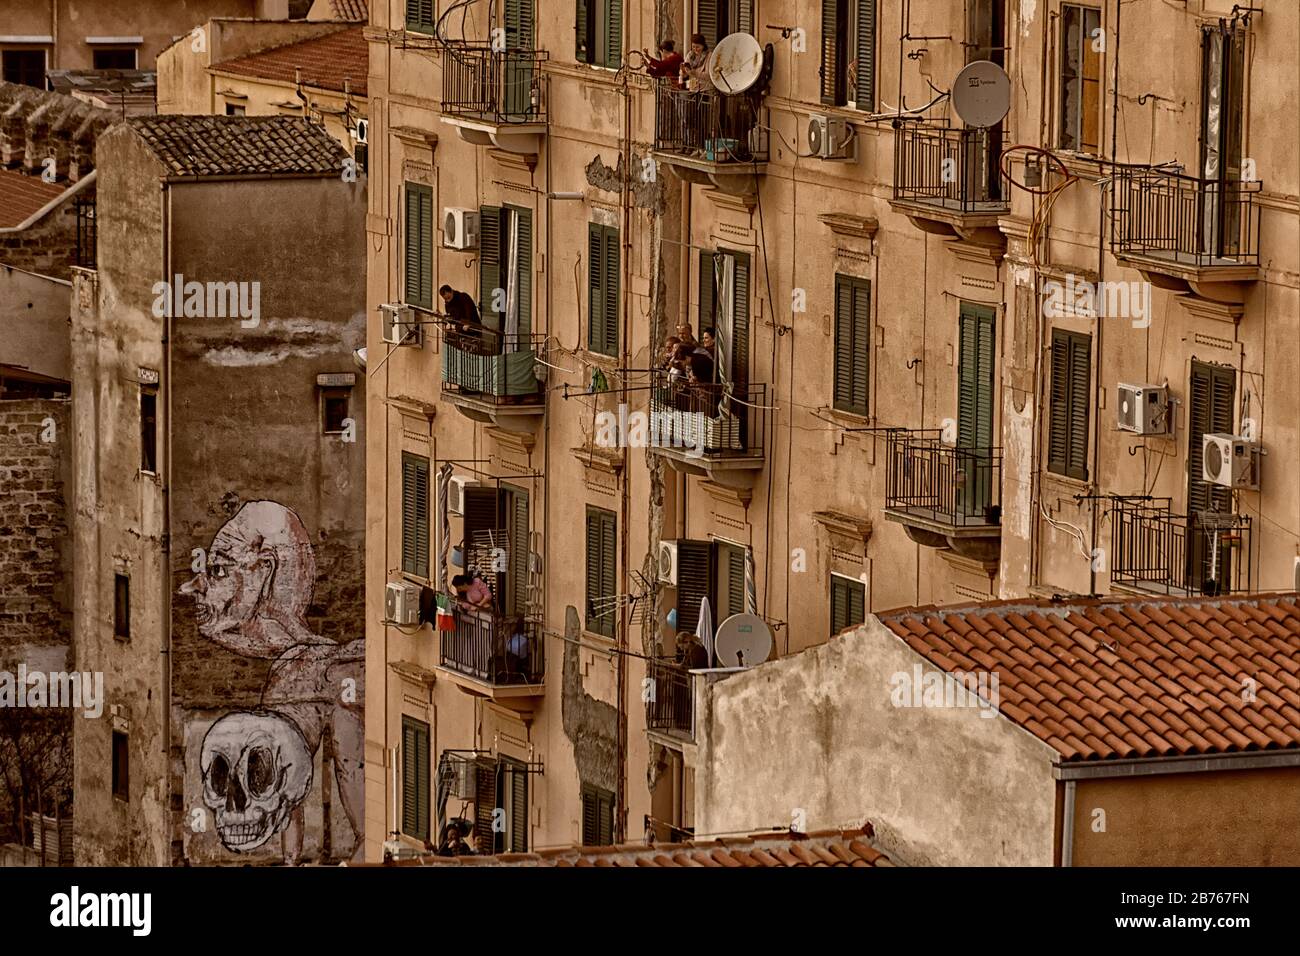 Balcony community in Palermo suburb during COVID-19 pandemic crisis March 2020 Stock Photo